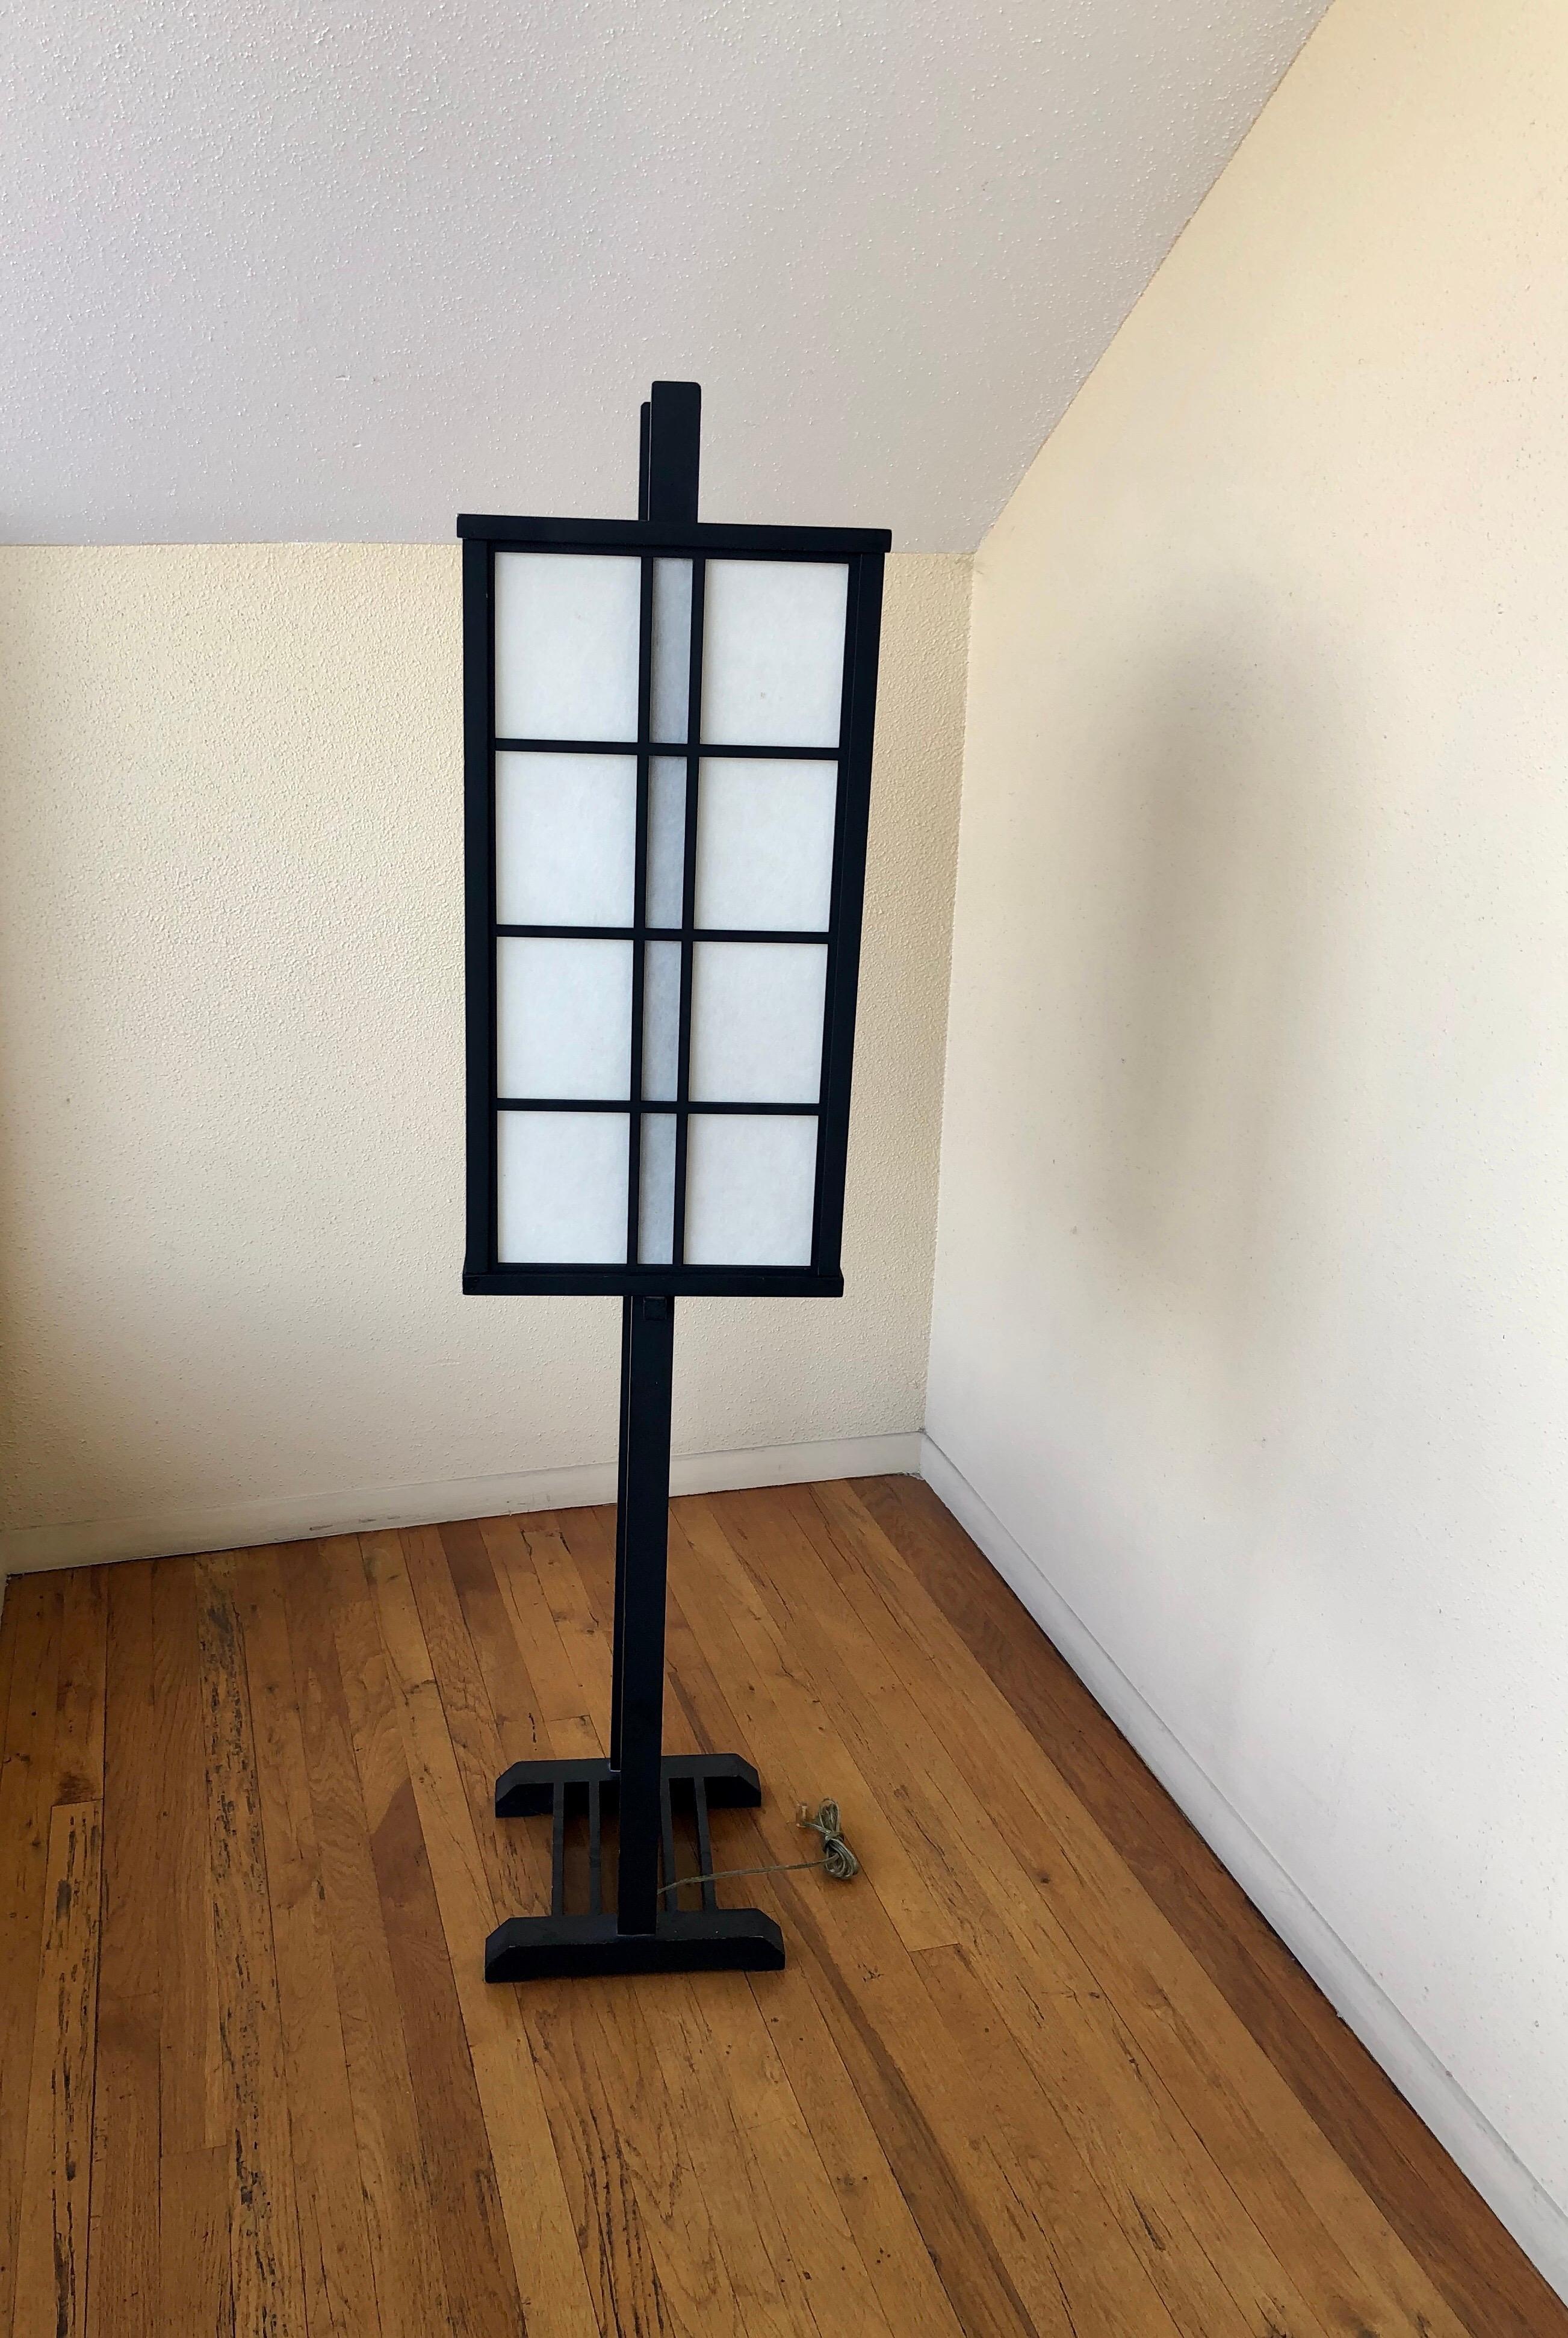 Minimalist Japanese lantern floor lamp. Black lacquer Wood frame with removable rice paper shade, circa 1970s. Nice condition and working.